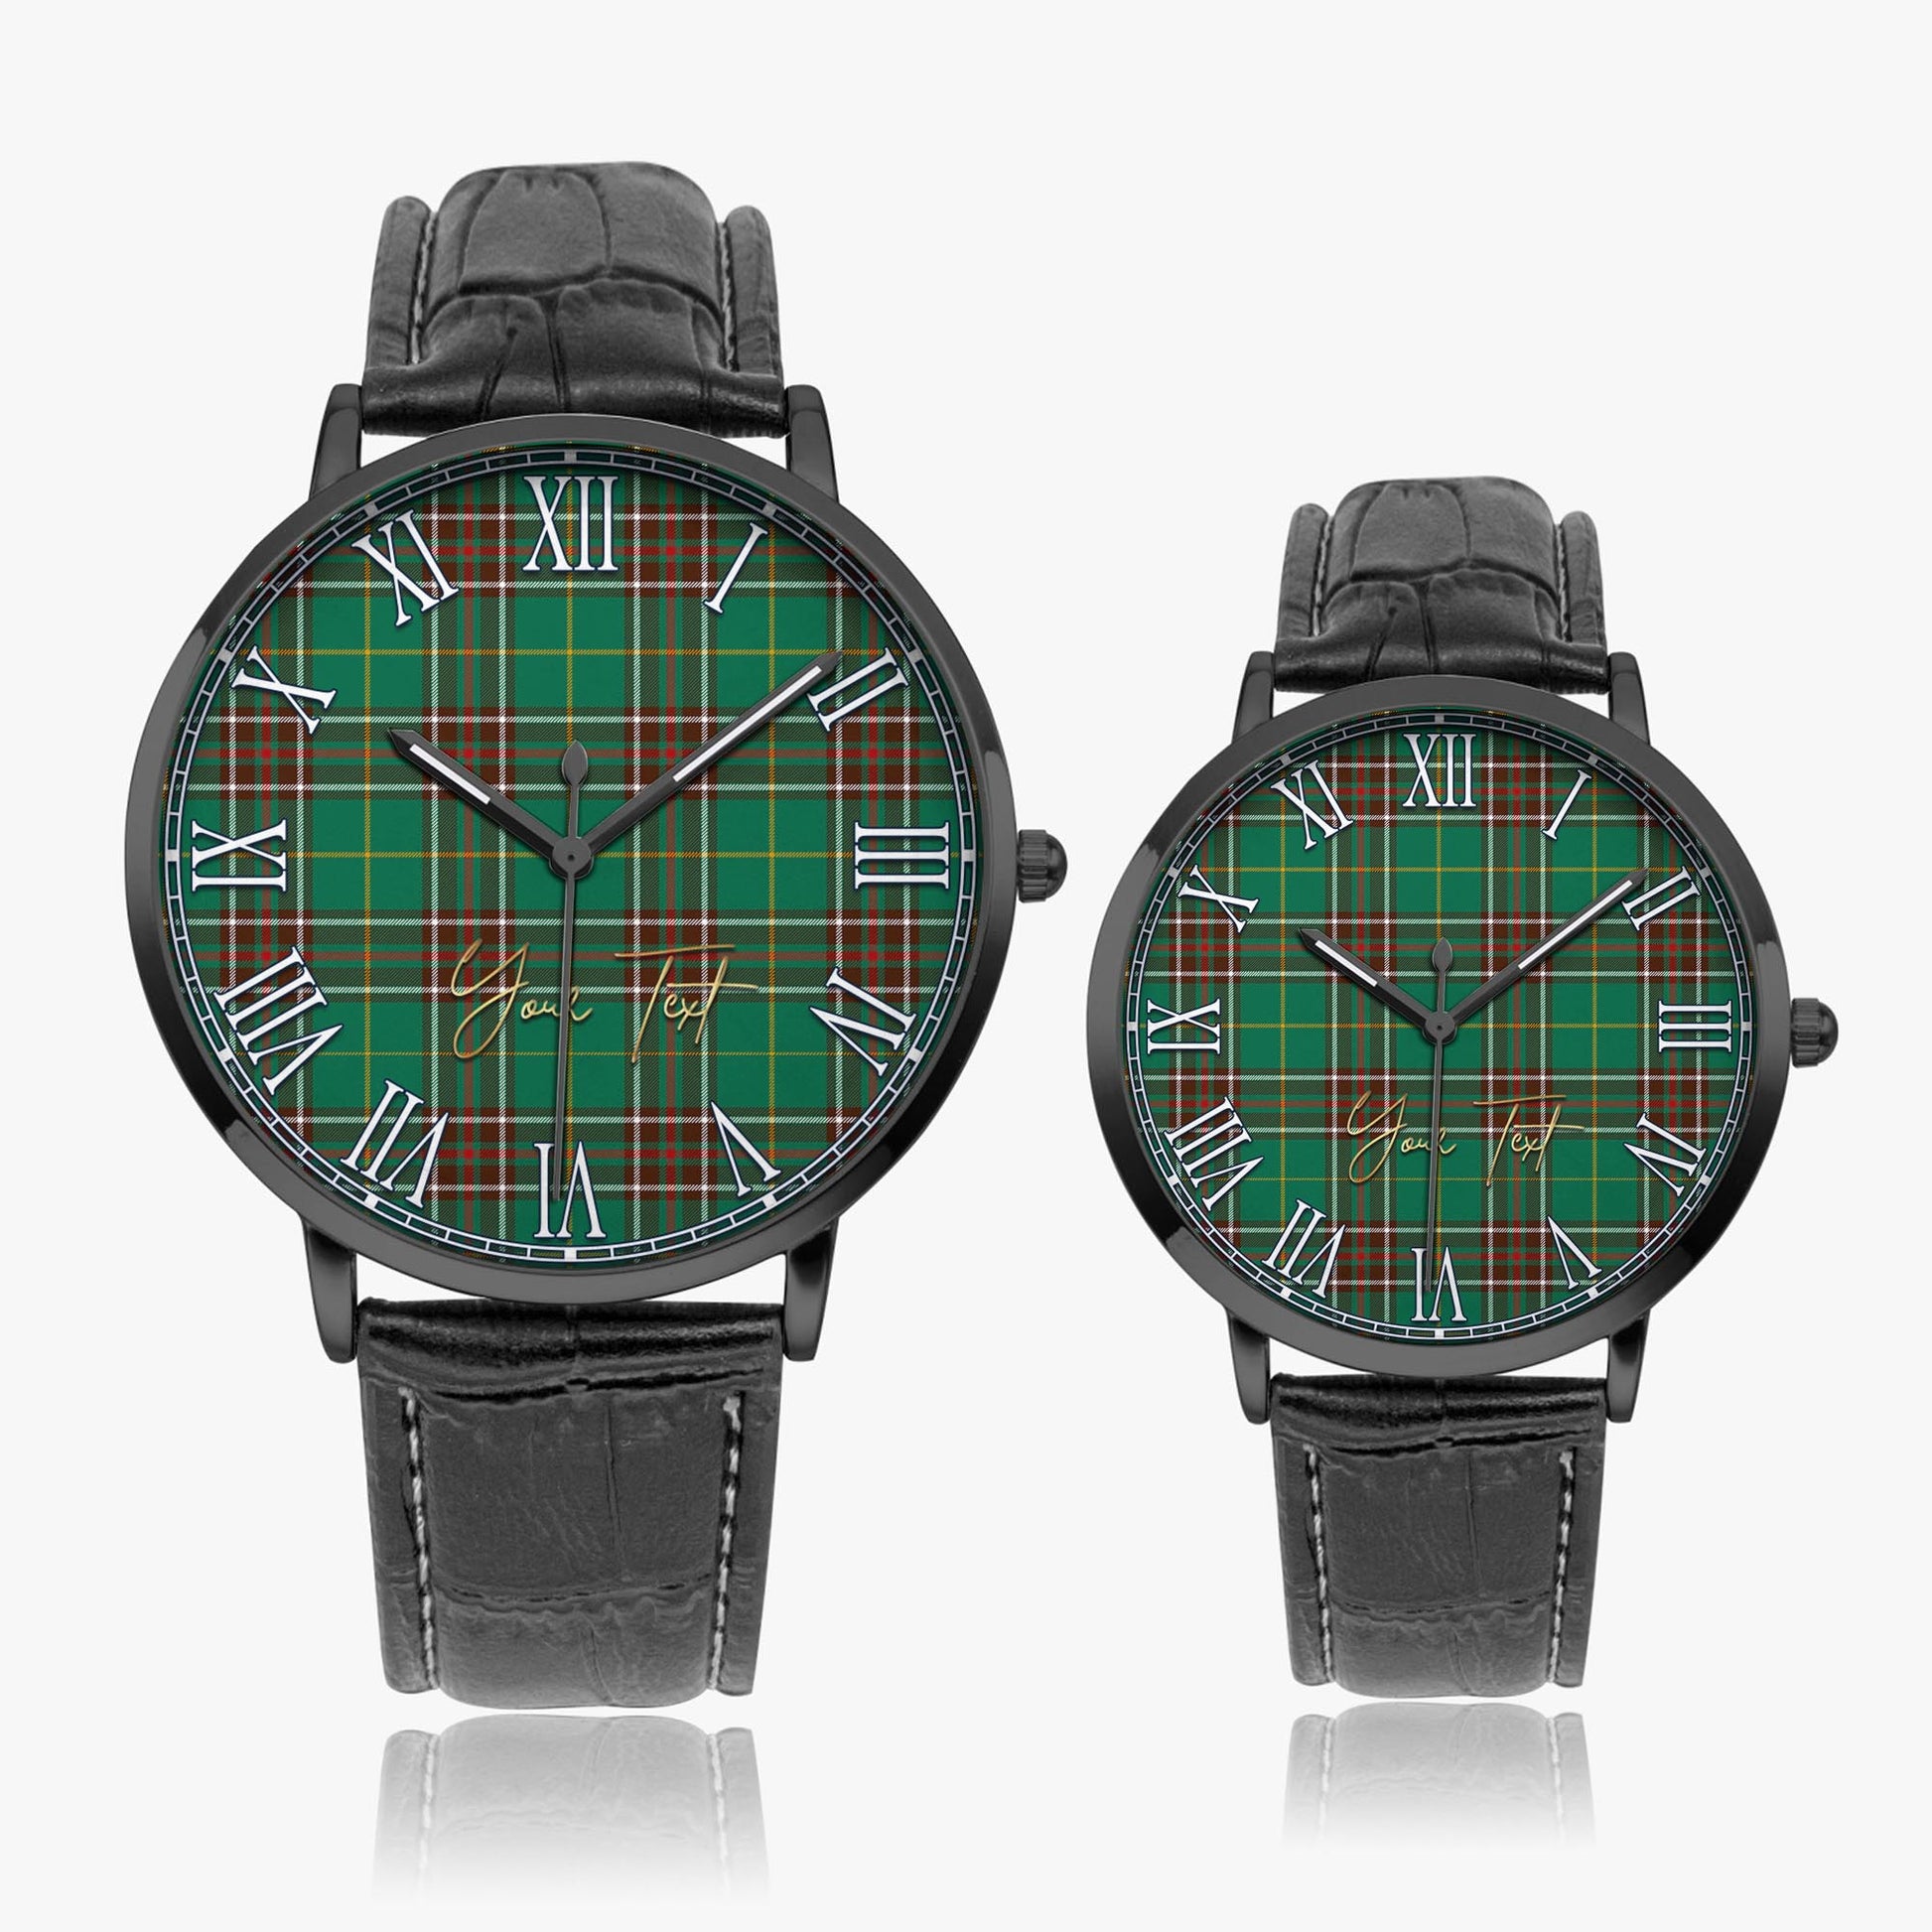 Newfoundland And Labrador Province Canada Tartan Personalized Your Text Leather Trap Quartz Watch Ultra Thin Black Case With Black Leather Strap - Tartanvibesclothing